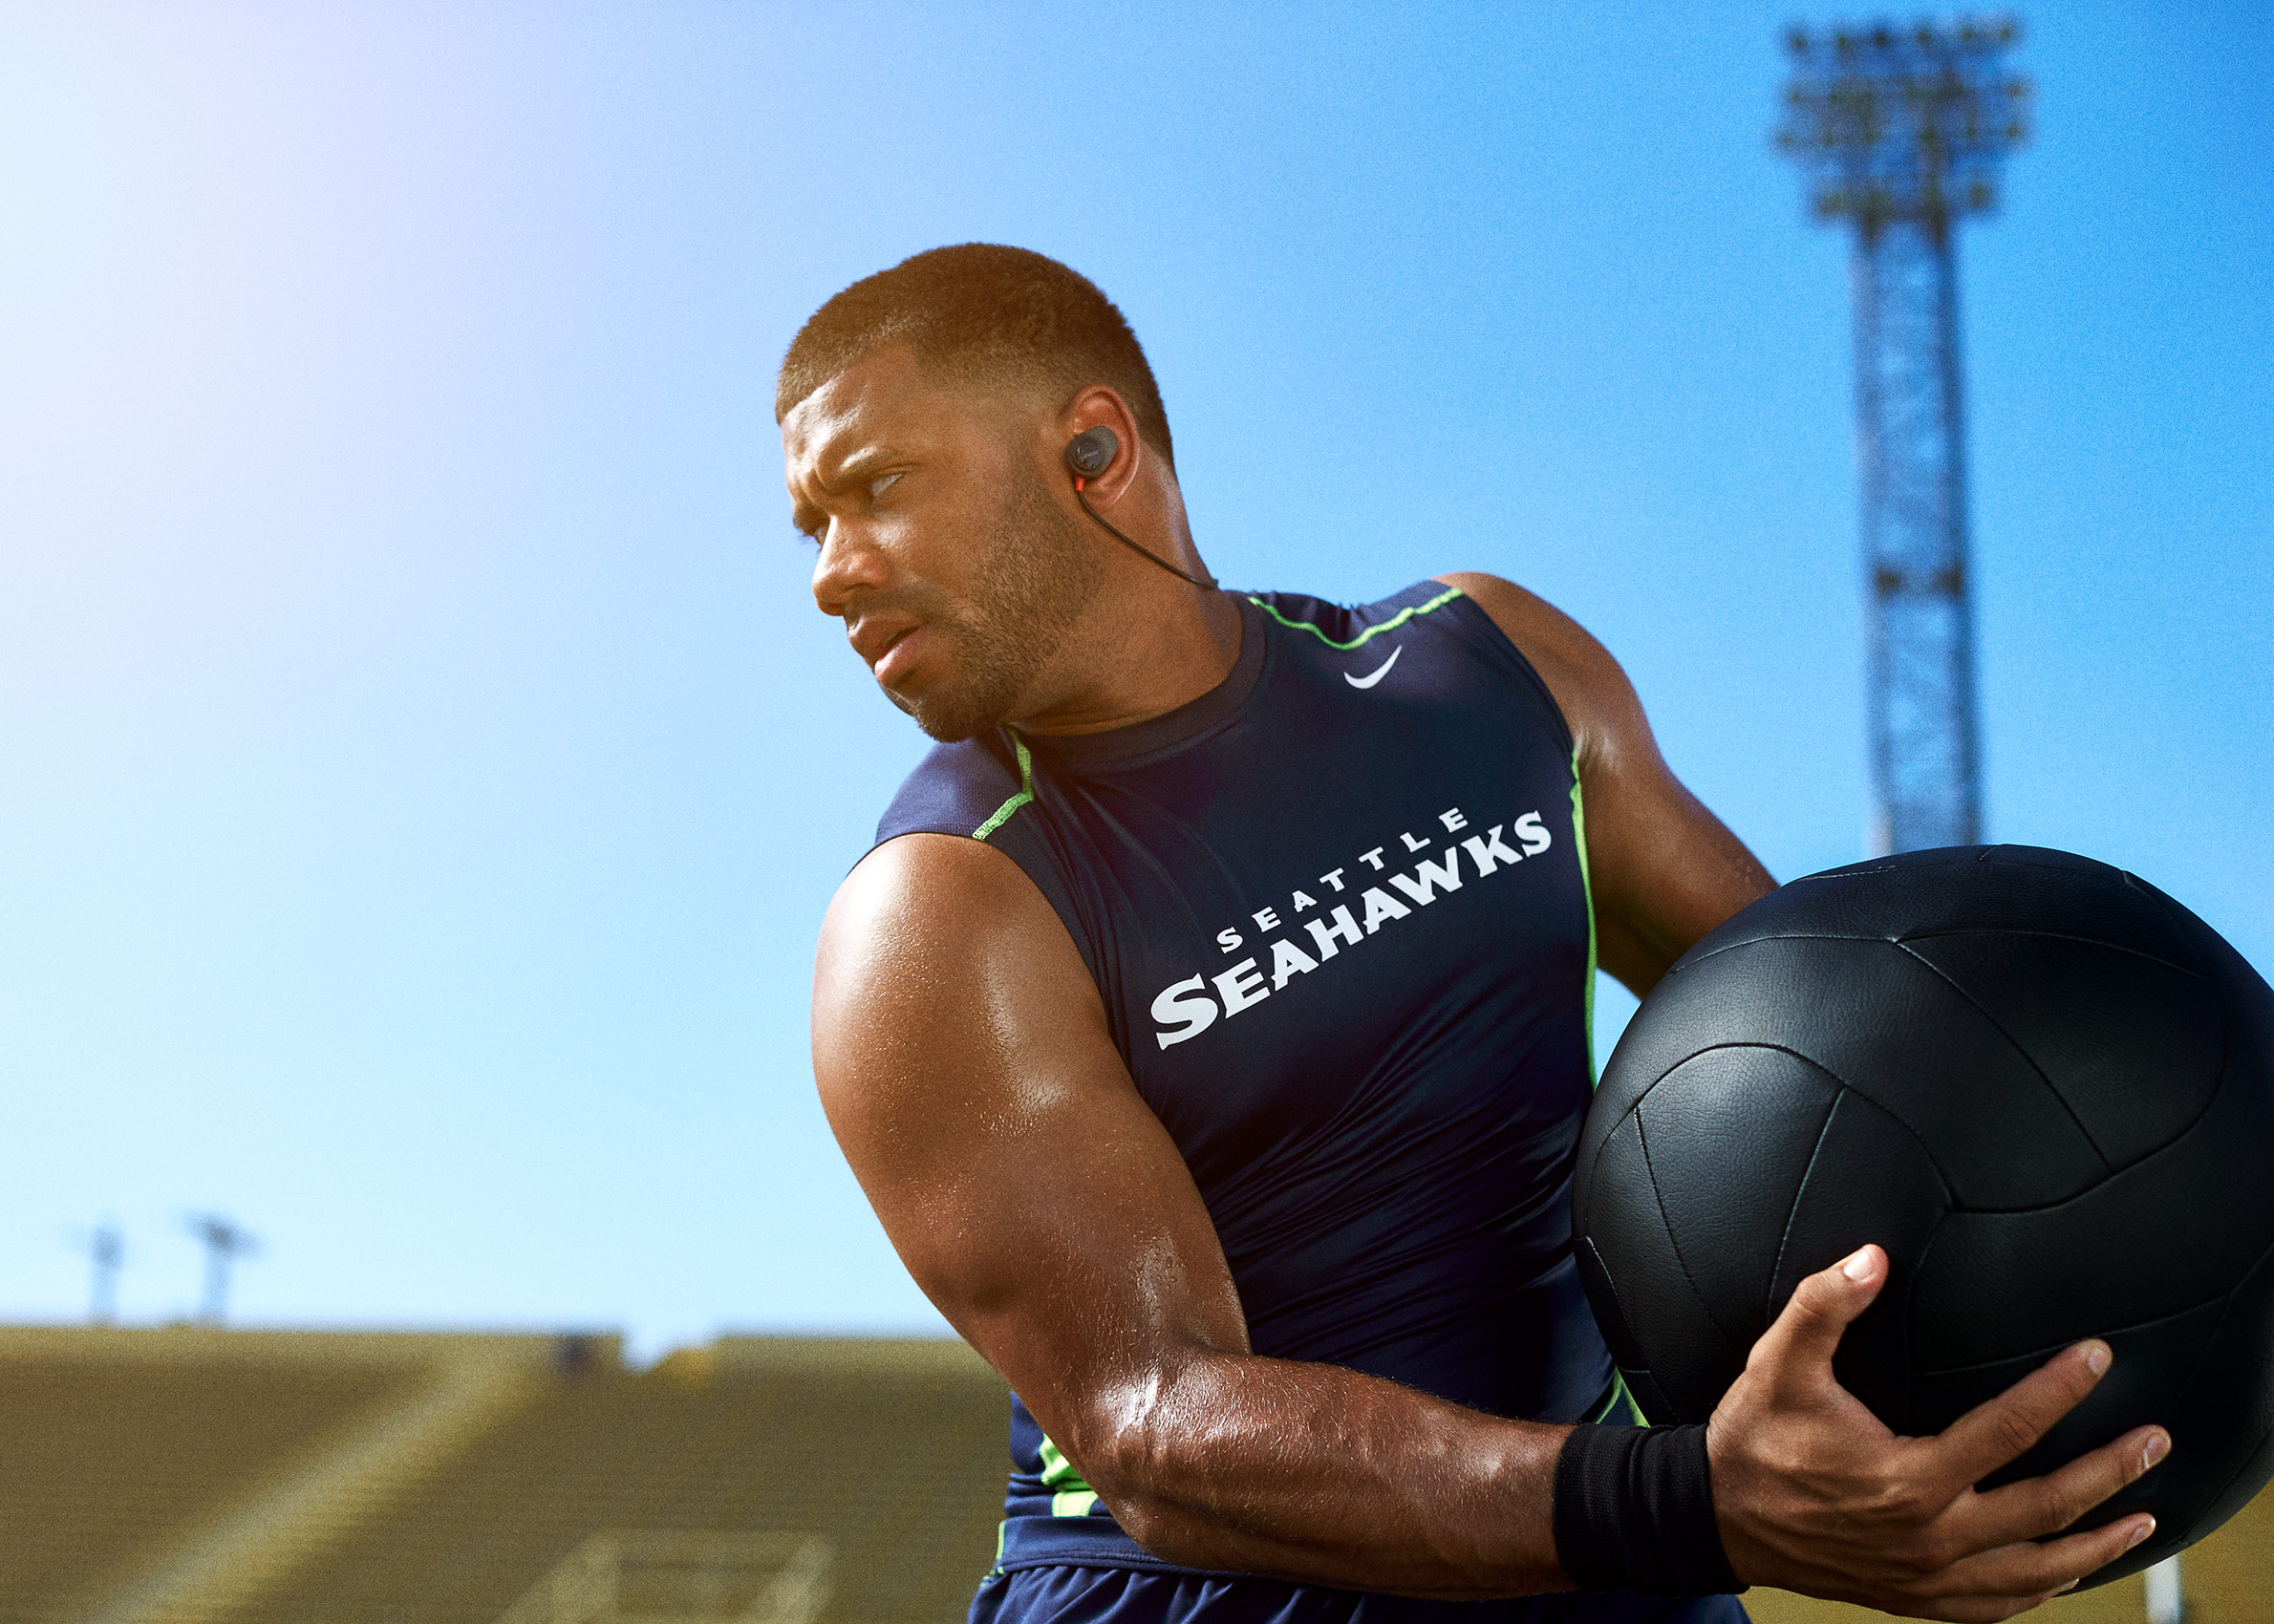 NFL_Bose_Russell-Wilson_5543-FLARE-web